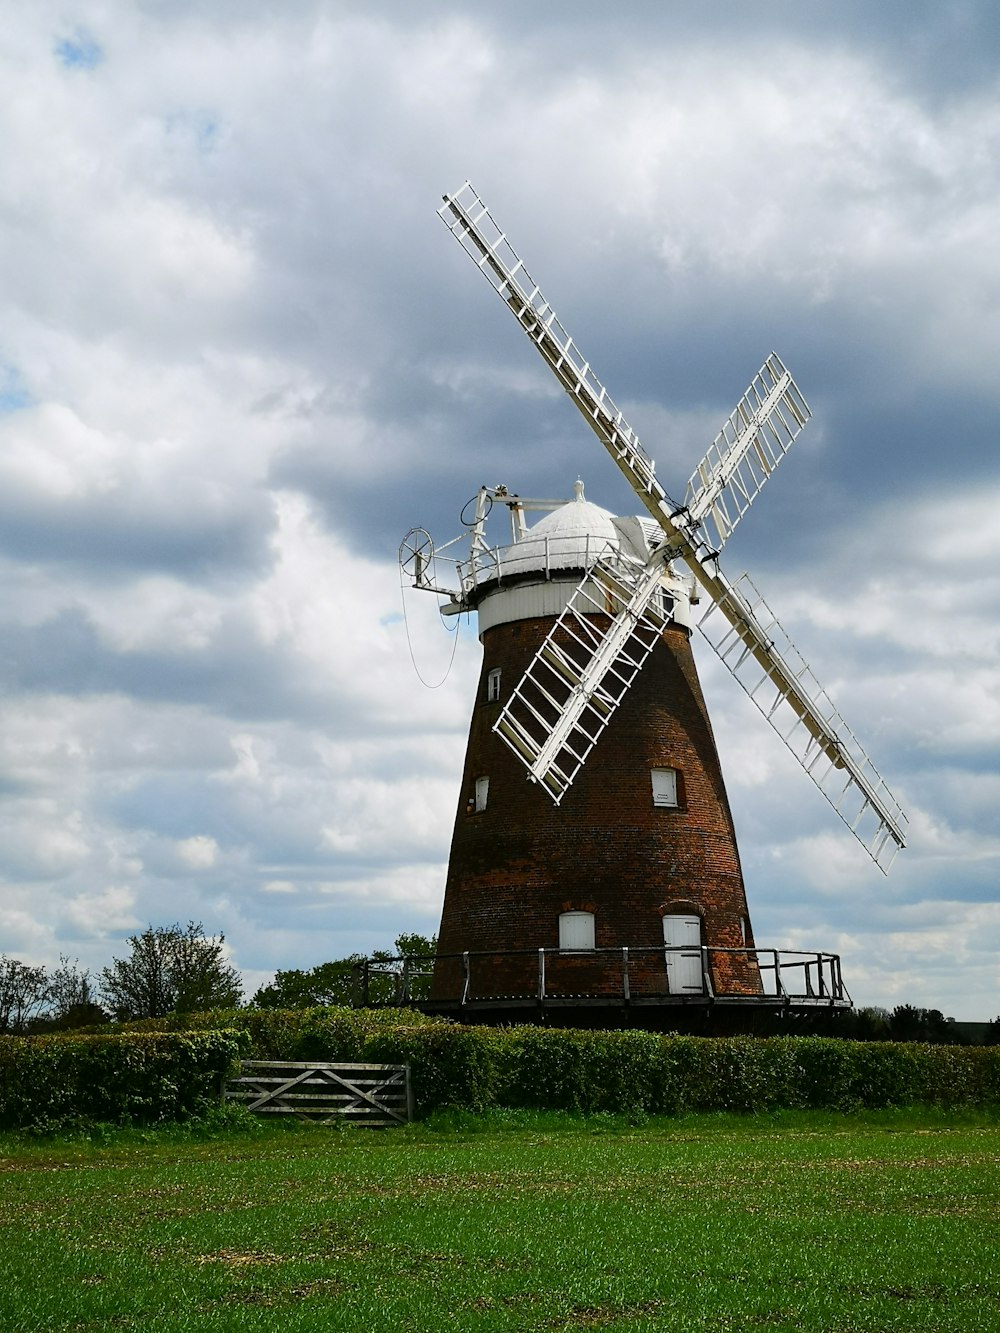 brown and white windmill under cloudy sky during daytime